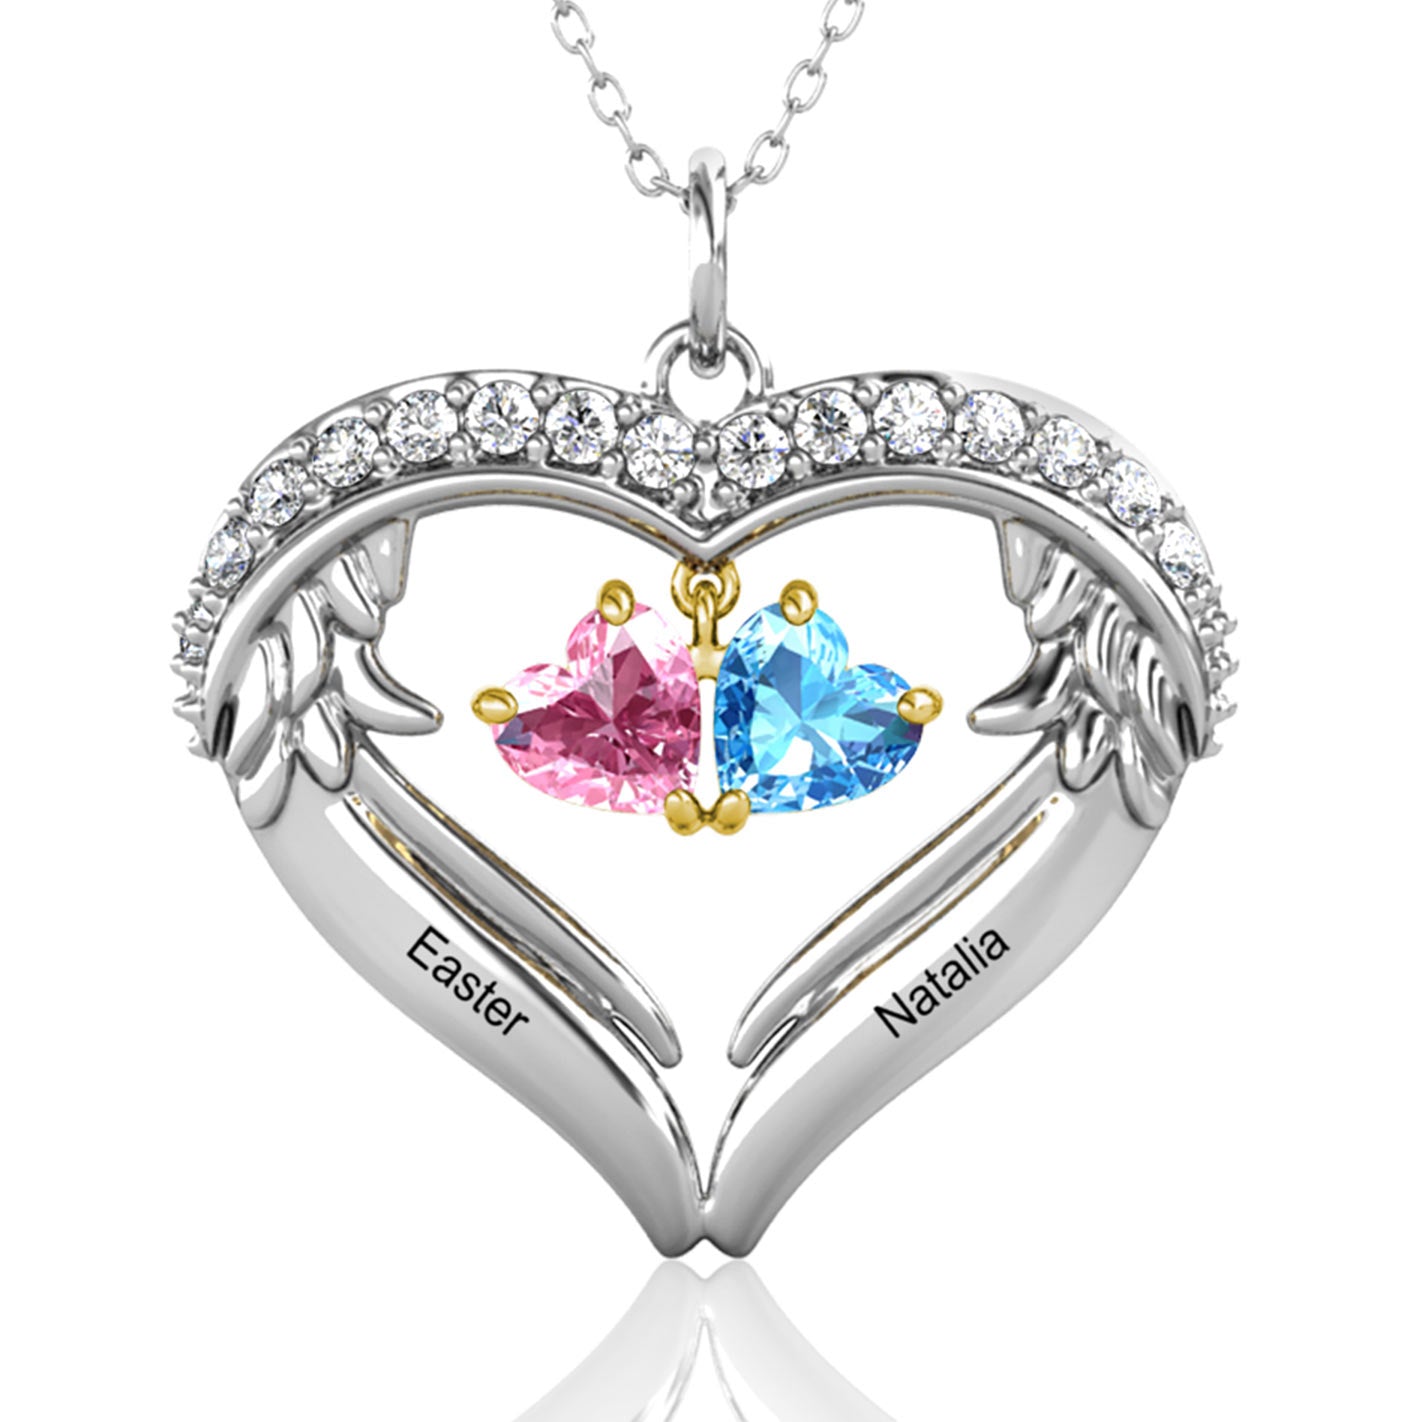 Personalised Engraved Heart Necklace with 2 Heart Birthstones